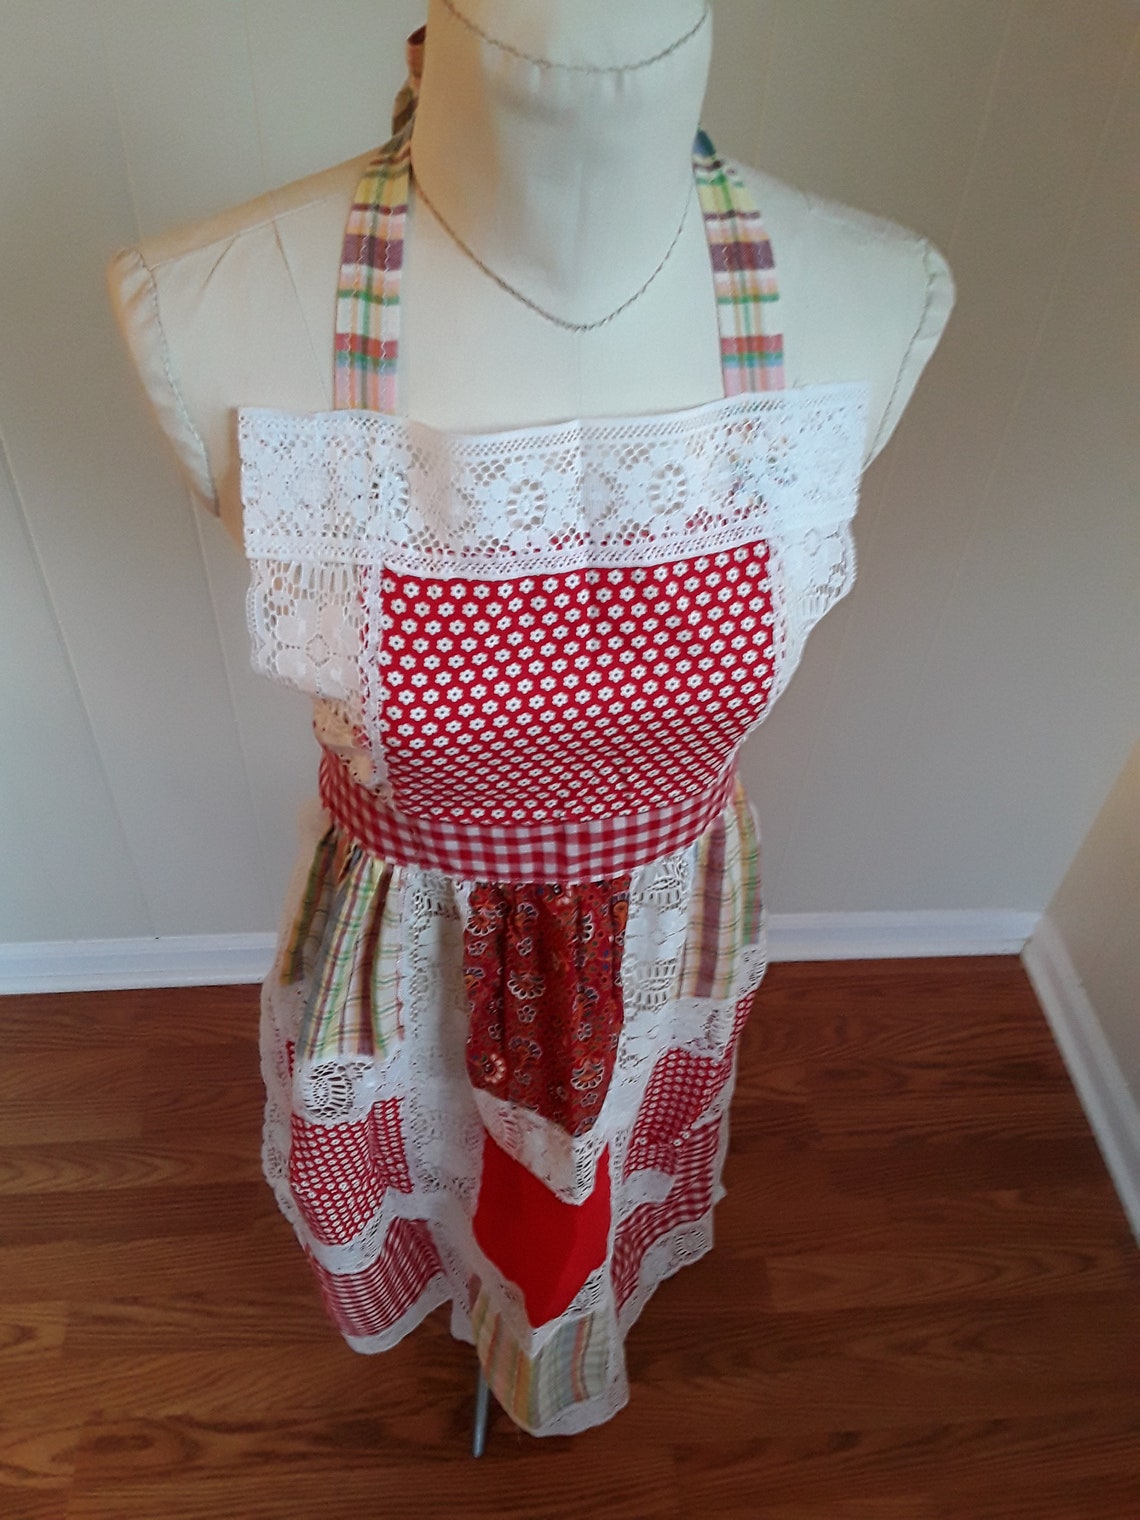 1980s Long Cotton Patchwork and Lace Apron Red & White | Etsy